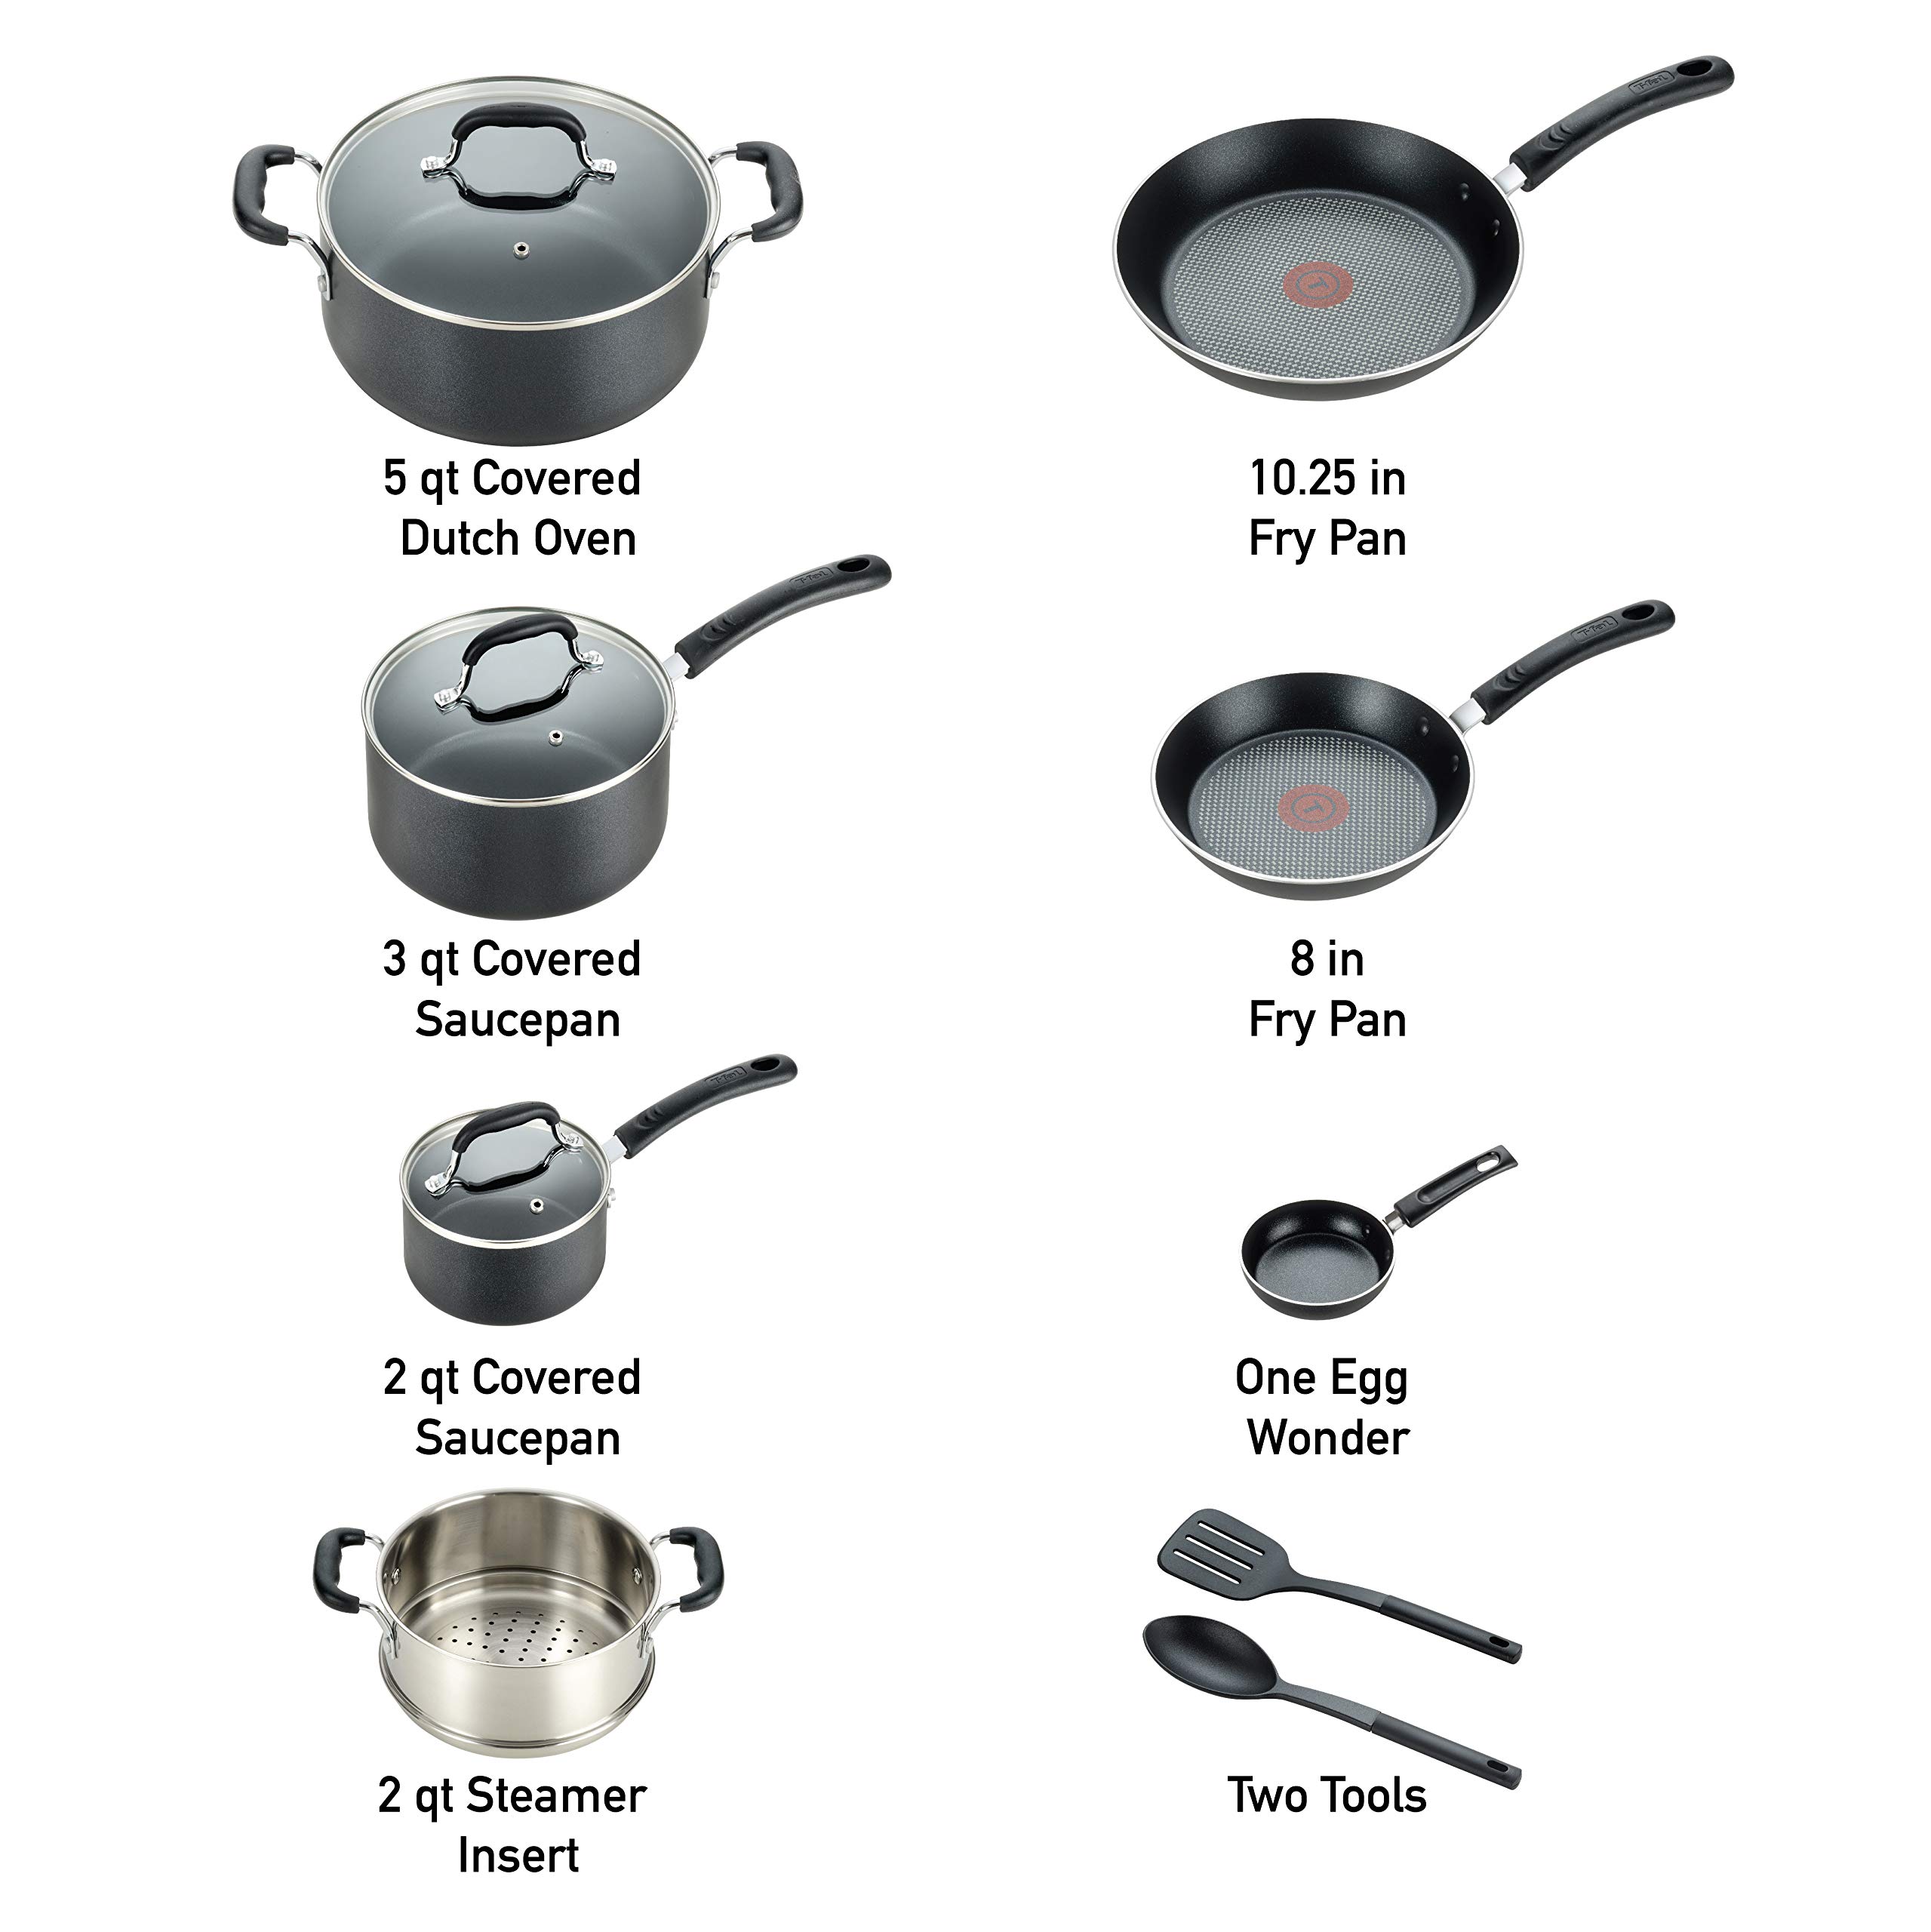 T-fal Experience Nonstick Cookware Set 12 Piece Induction Pots and Pans, Dishwasher Safe Black